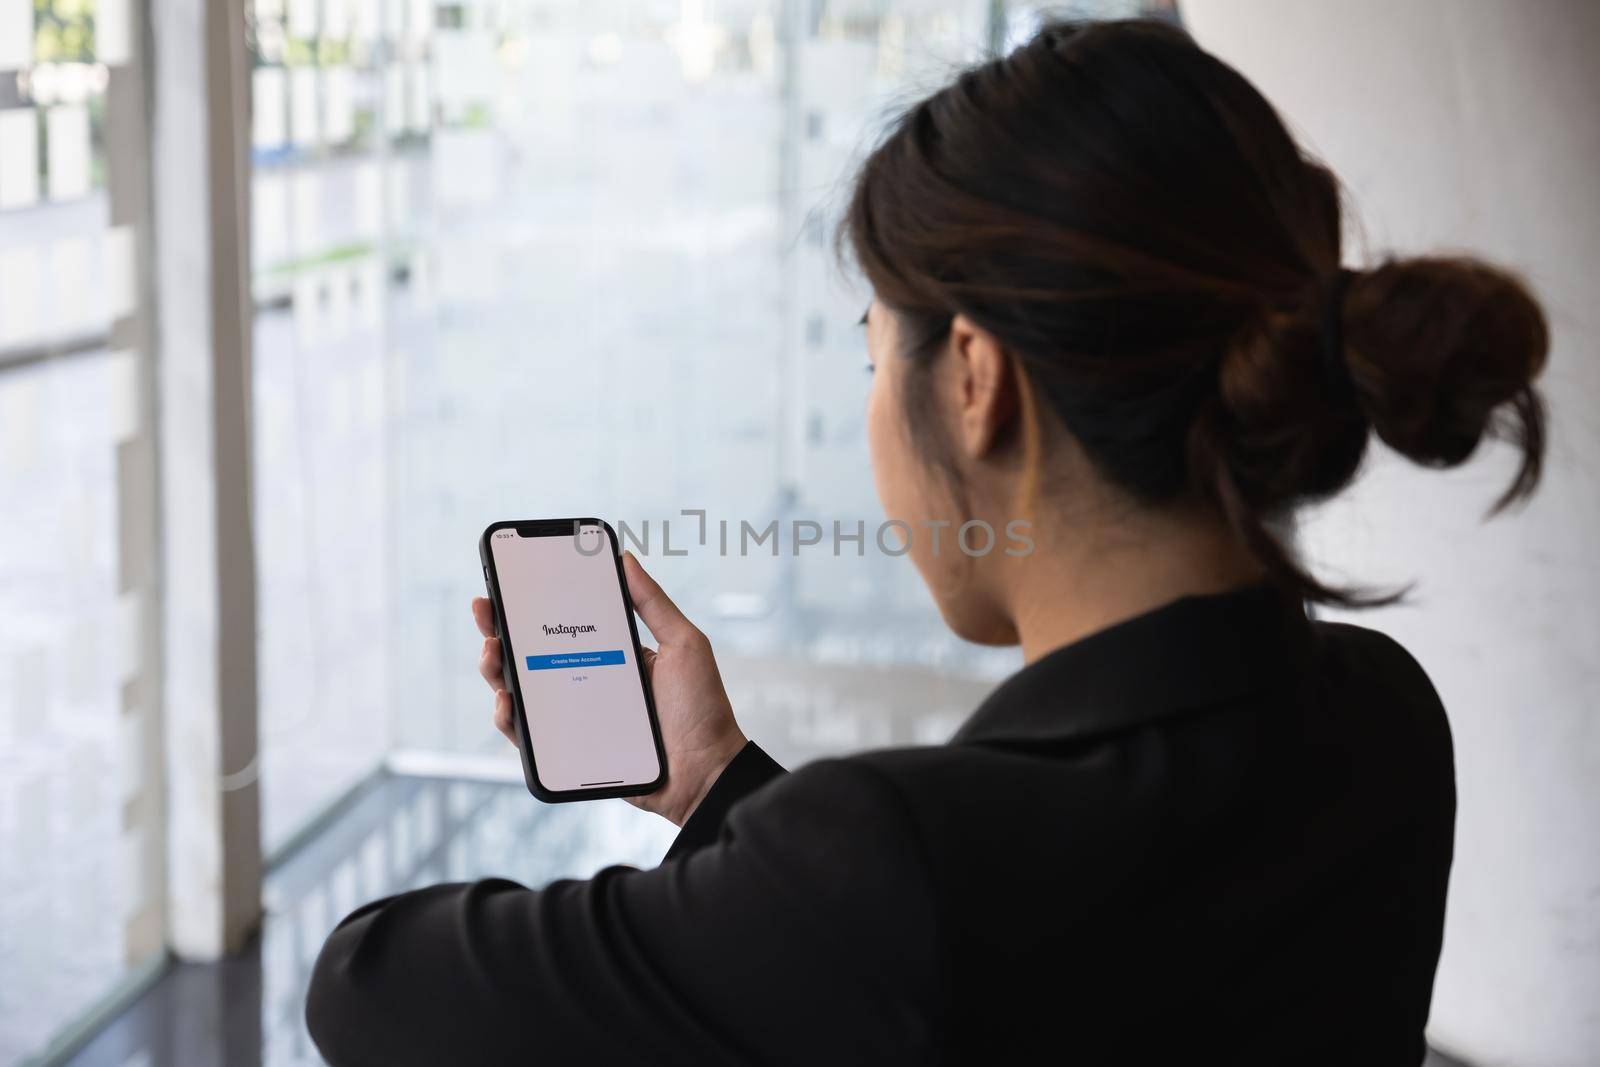 CHIANG MAI, THAILAND - MAR 01, 2021: A woman hand holding iphone with login screen of instagram application. Instagram is largest and most popular photograph social networking